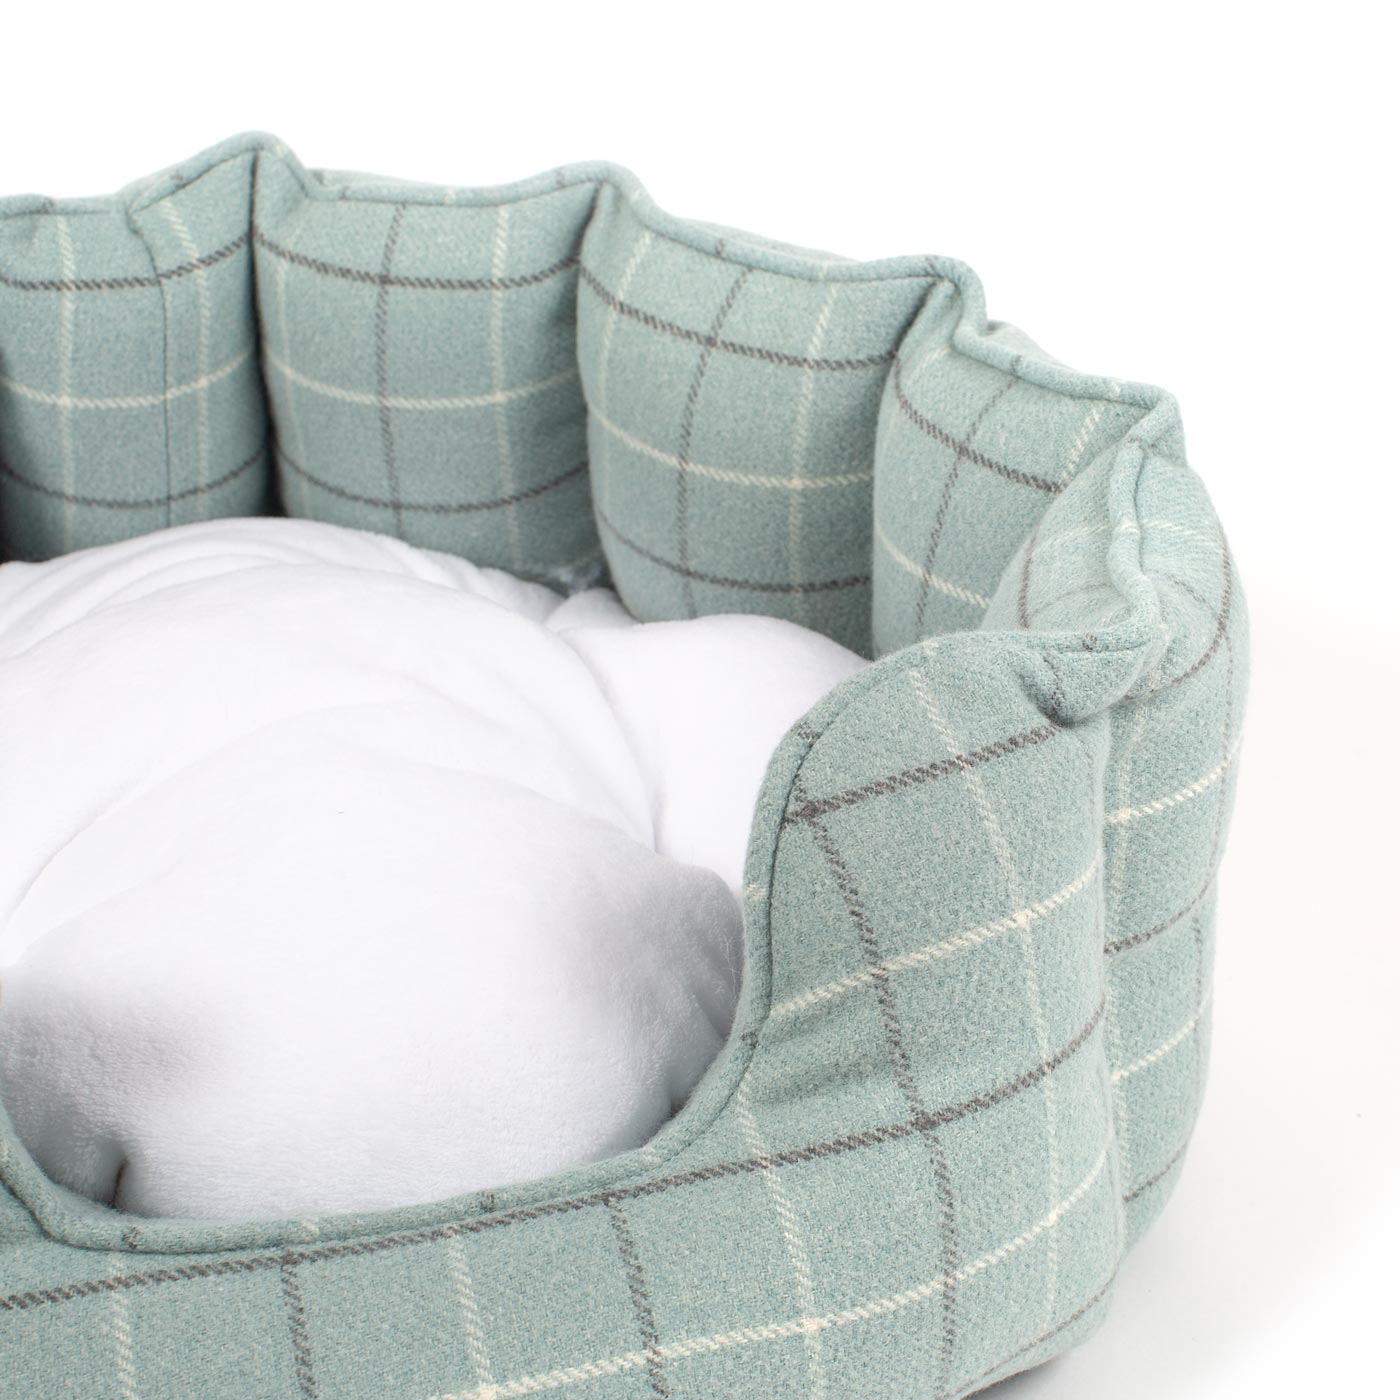 High Wall Check Tweed Bed For Dogs